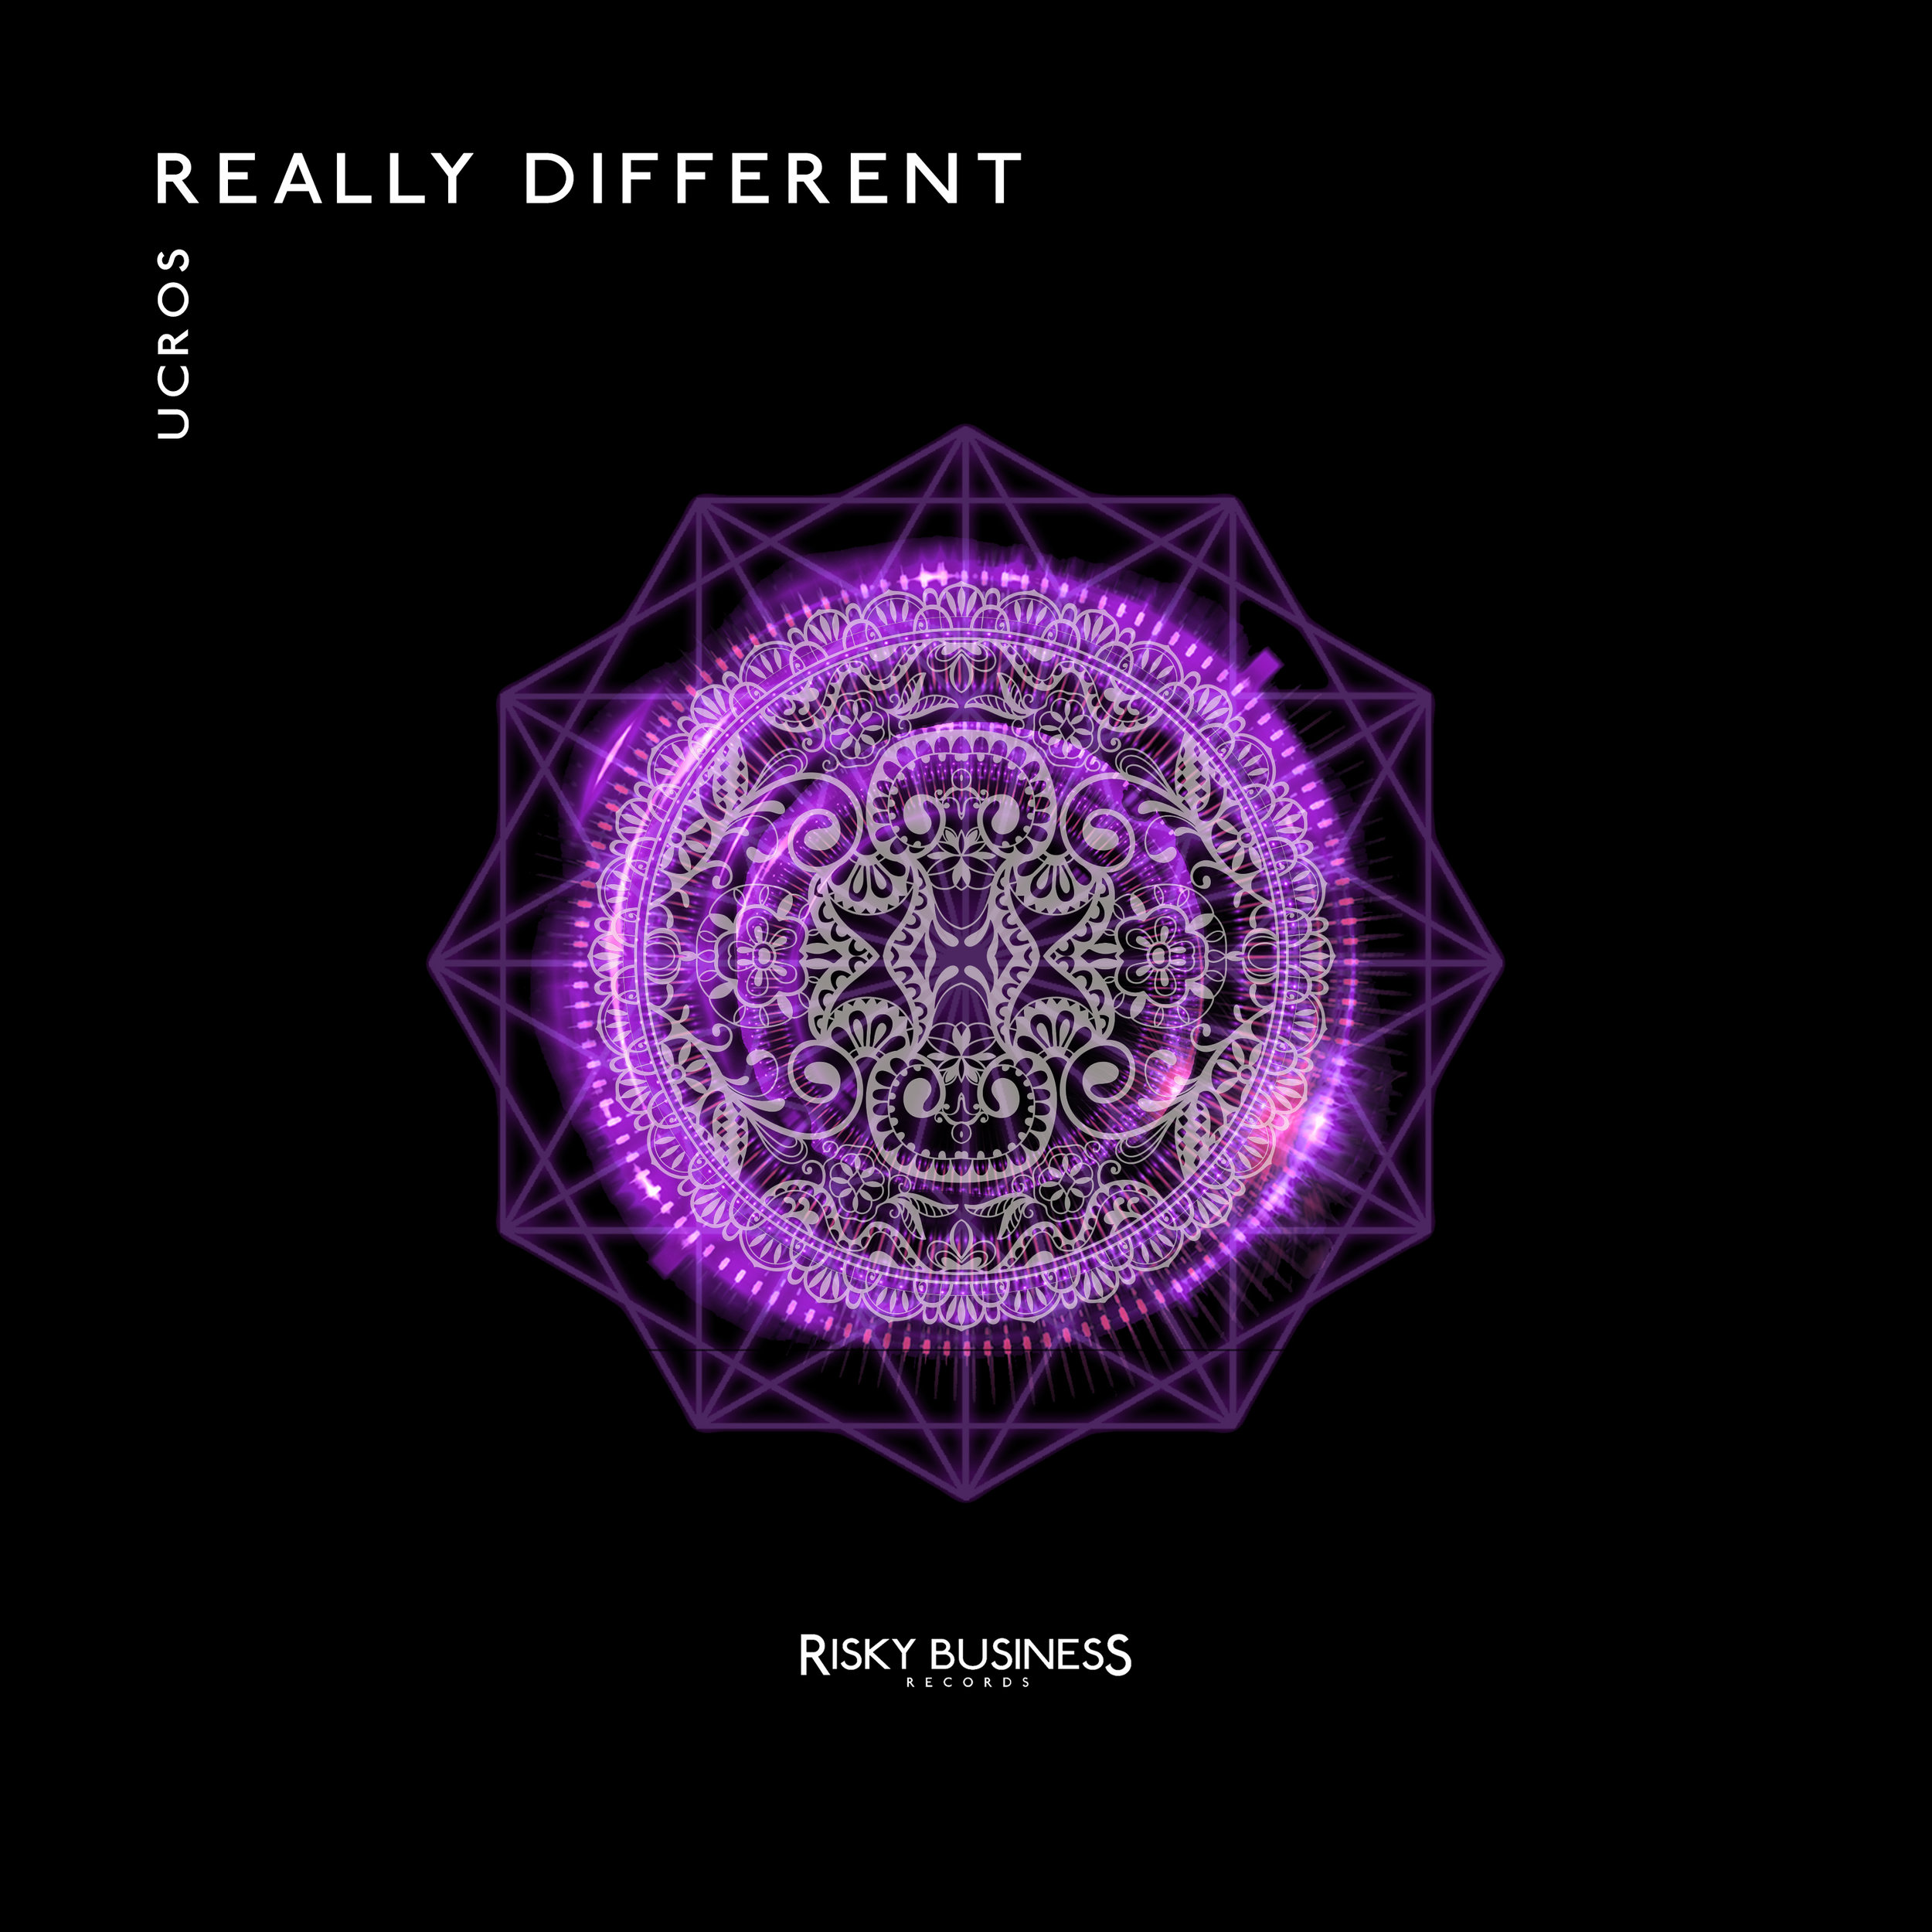 Ucros - Really Different (Cover).jpg